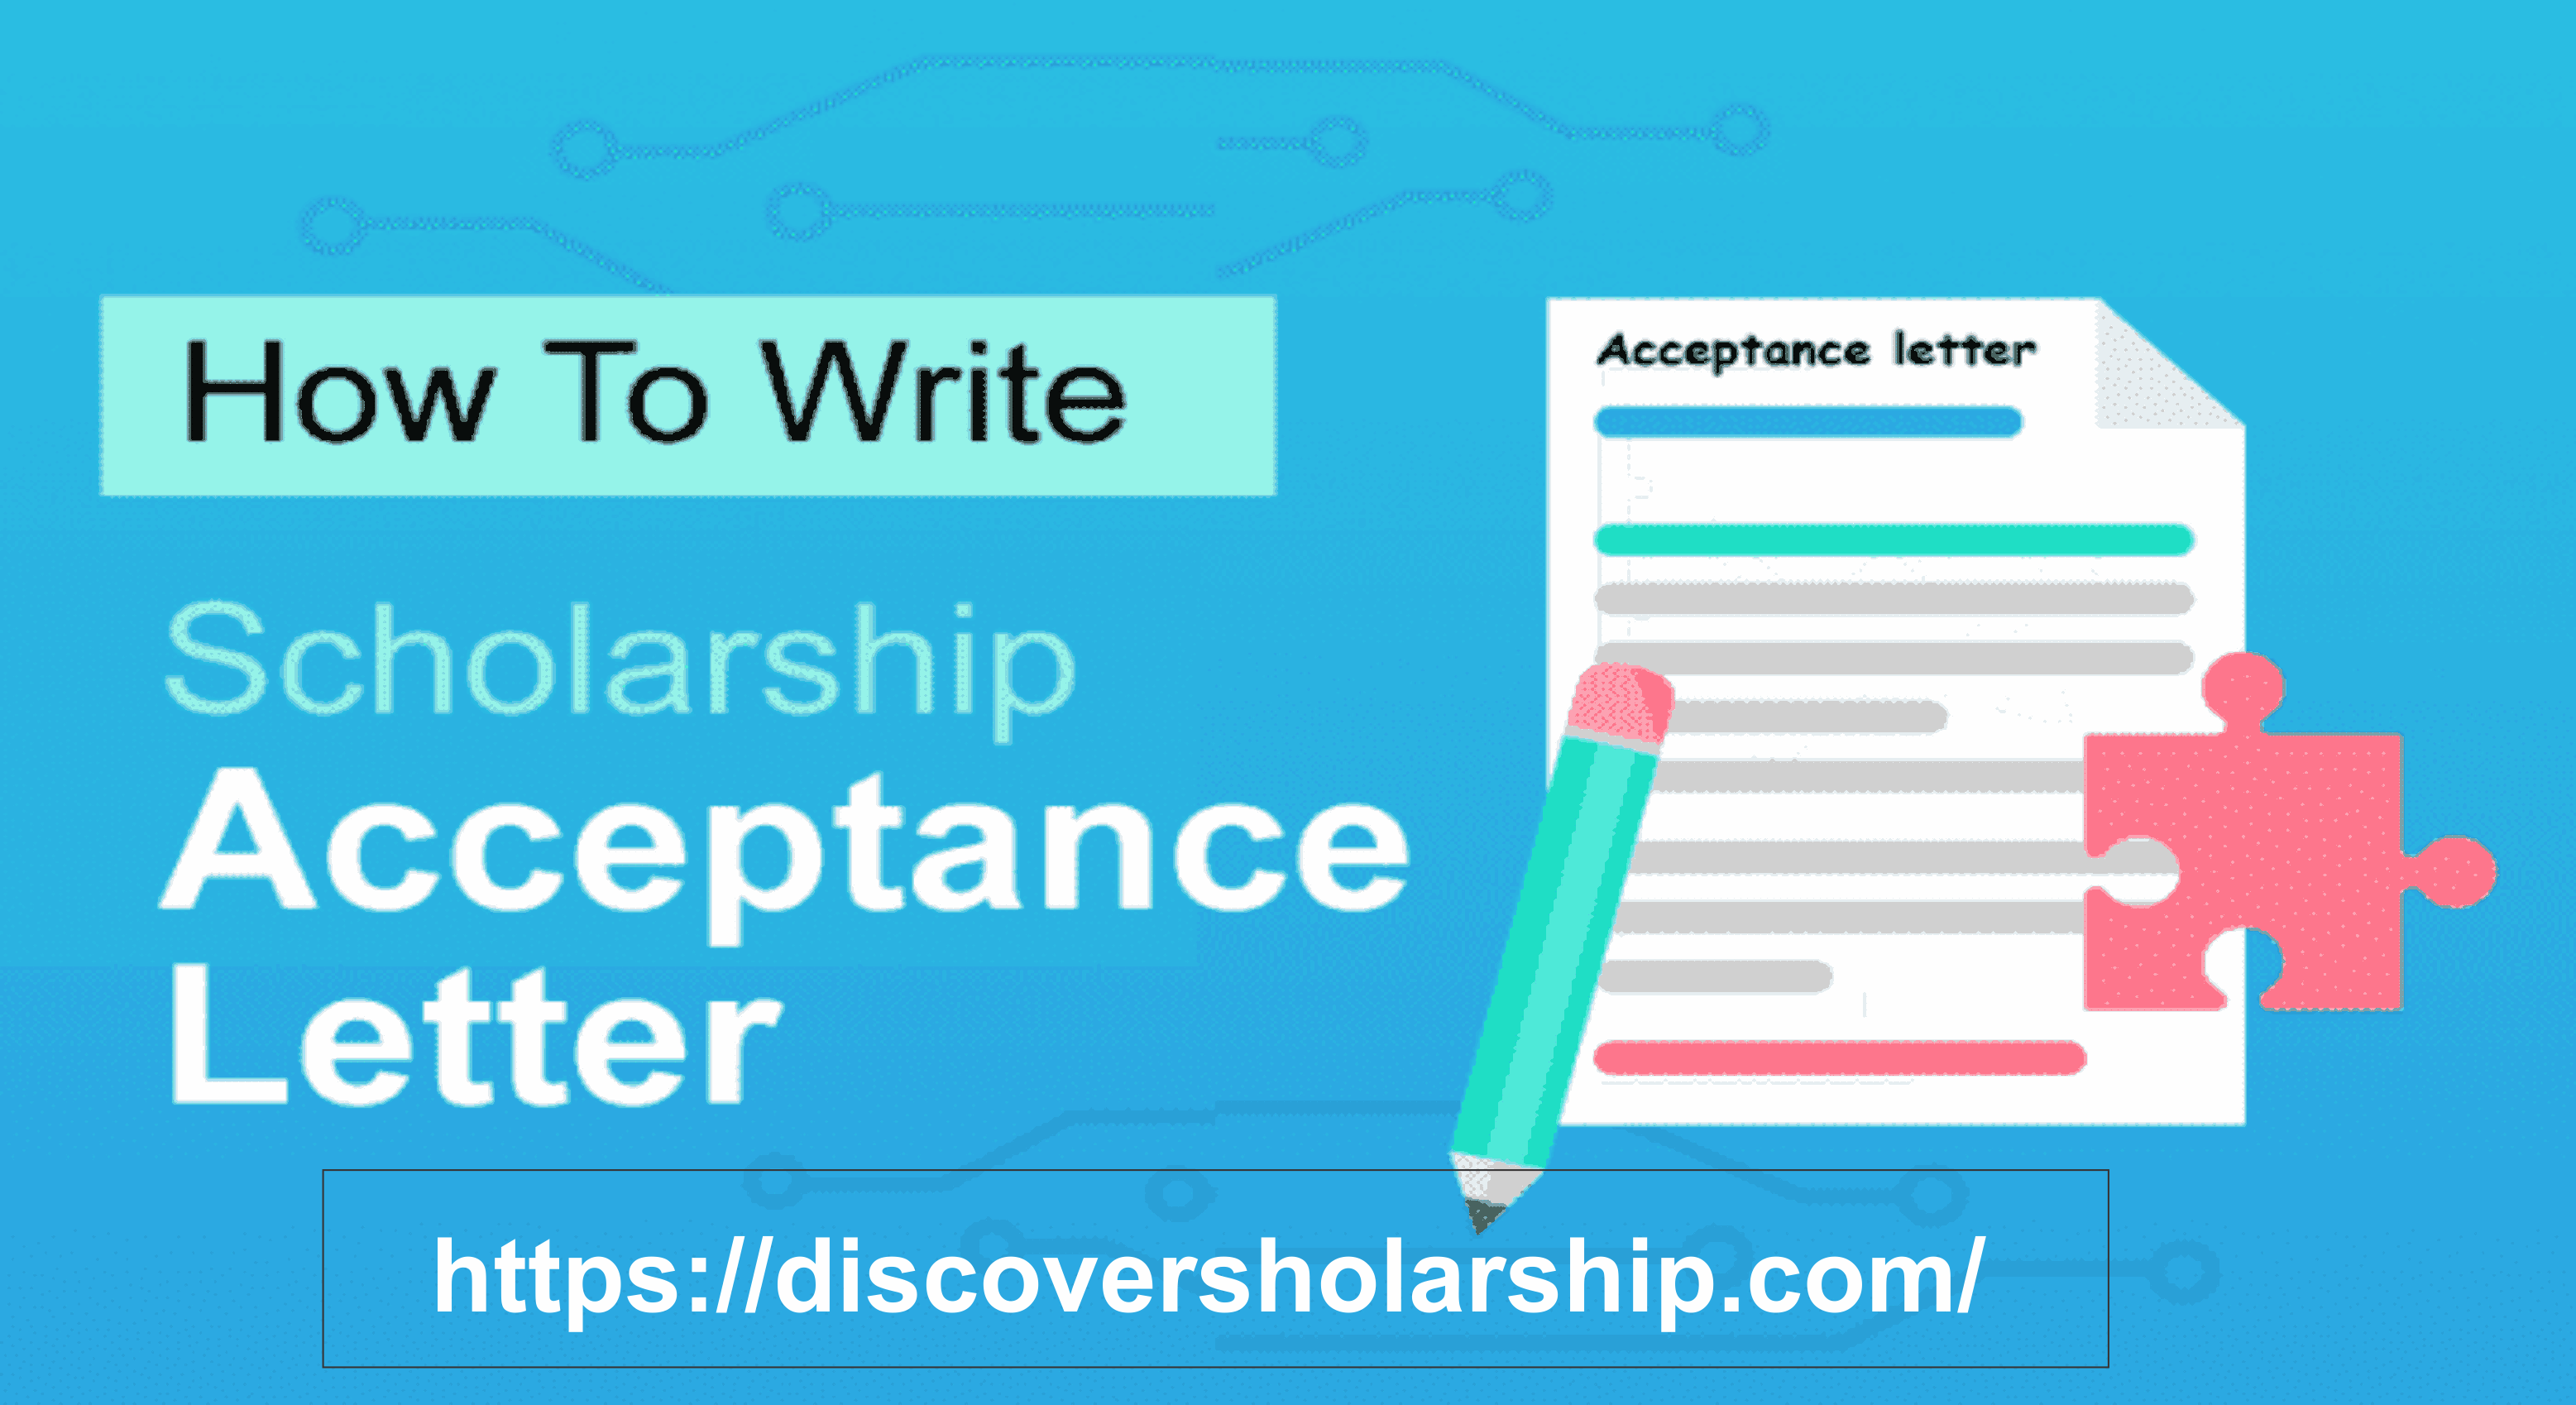 How To Write A Scholarship Acceptance Letter